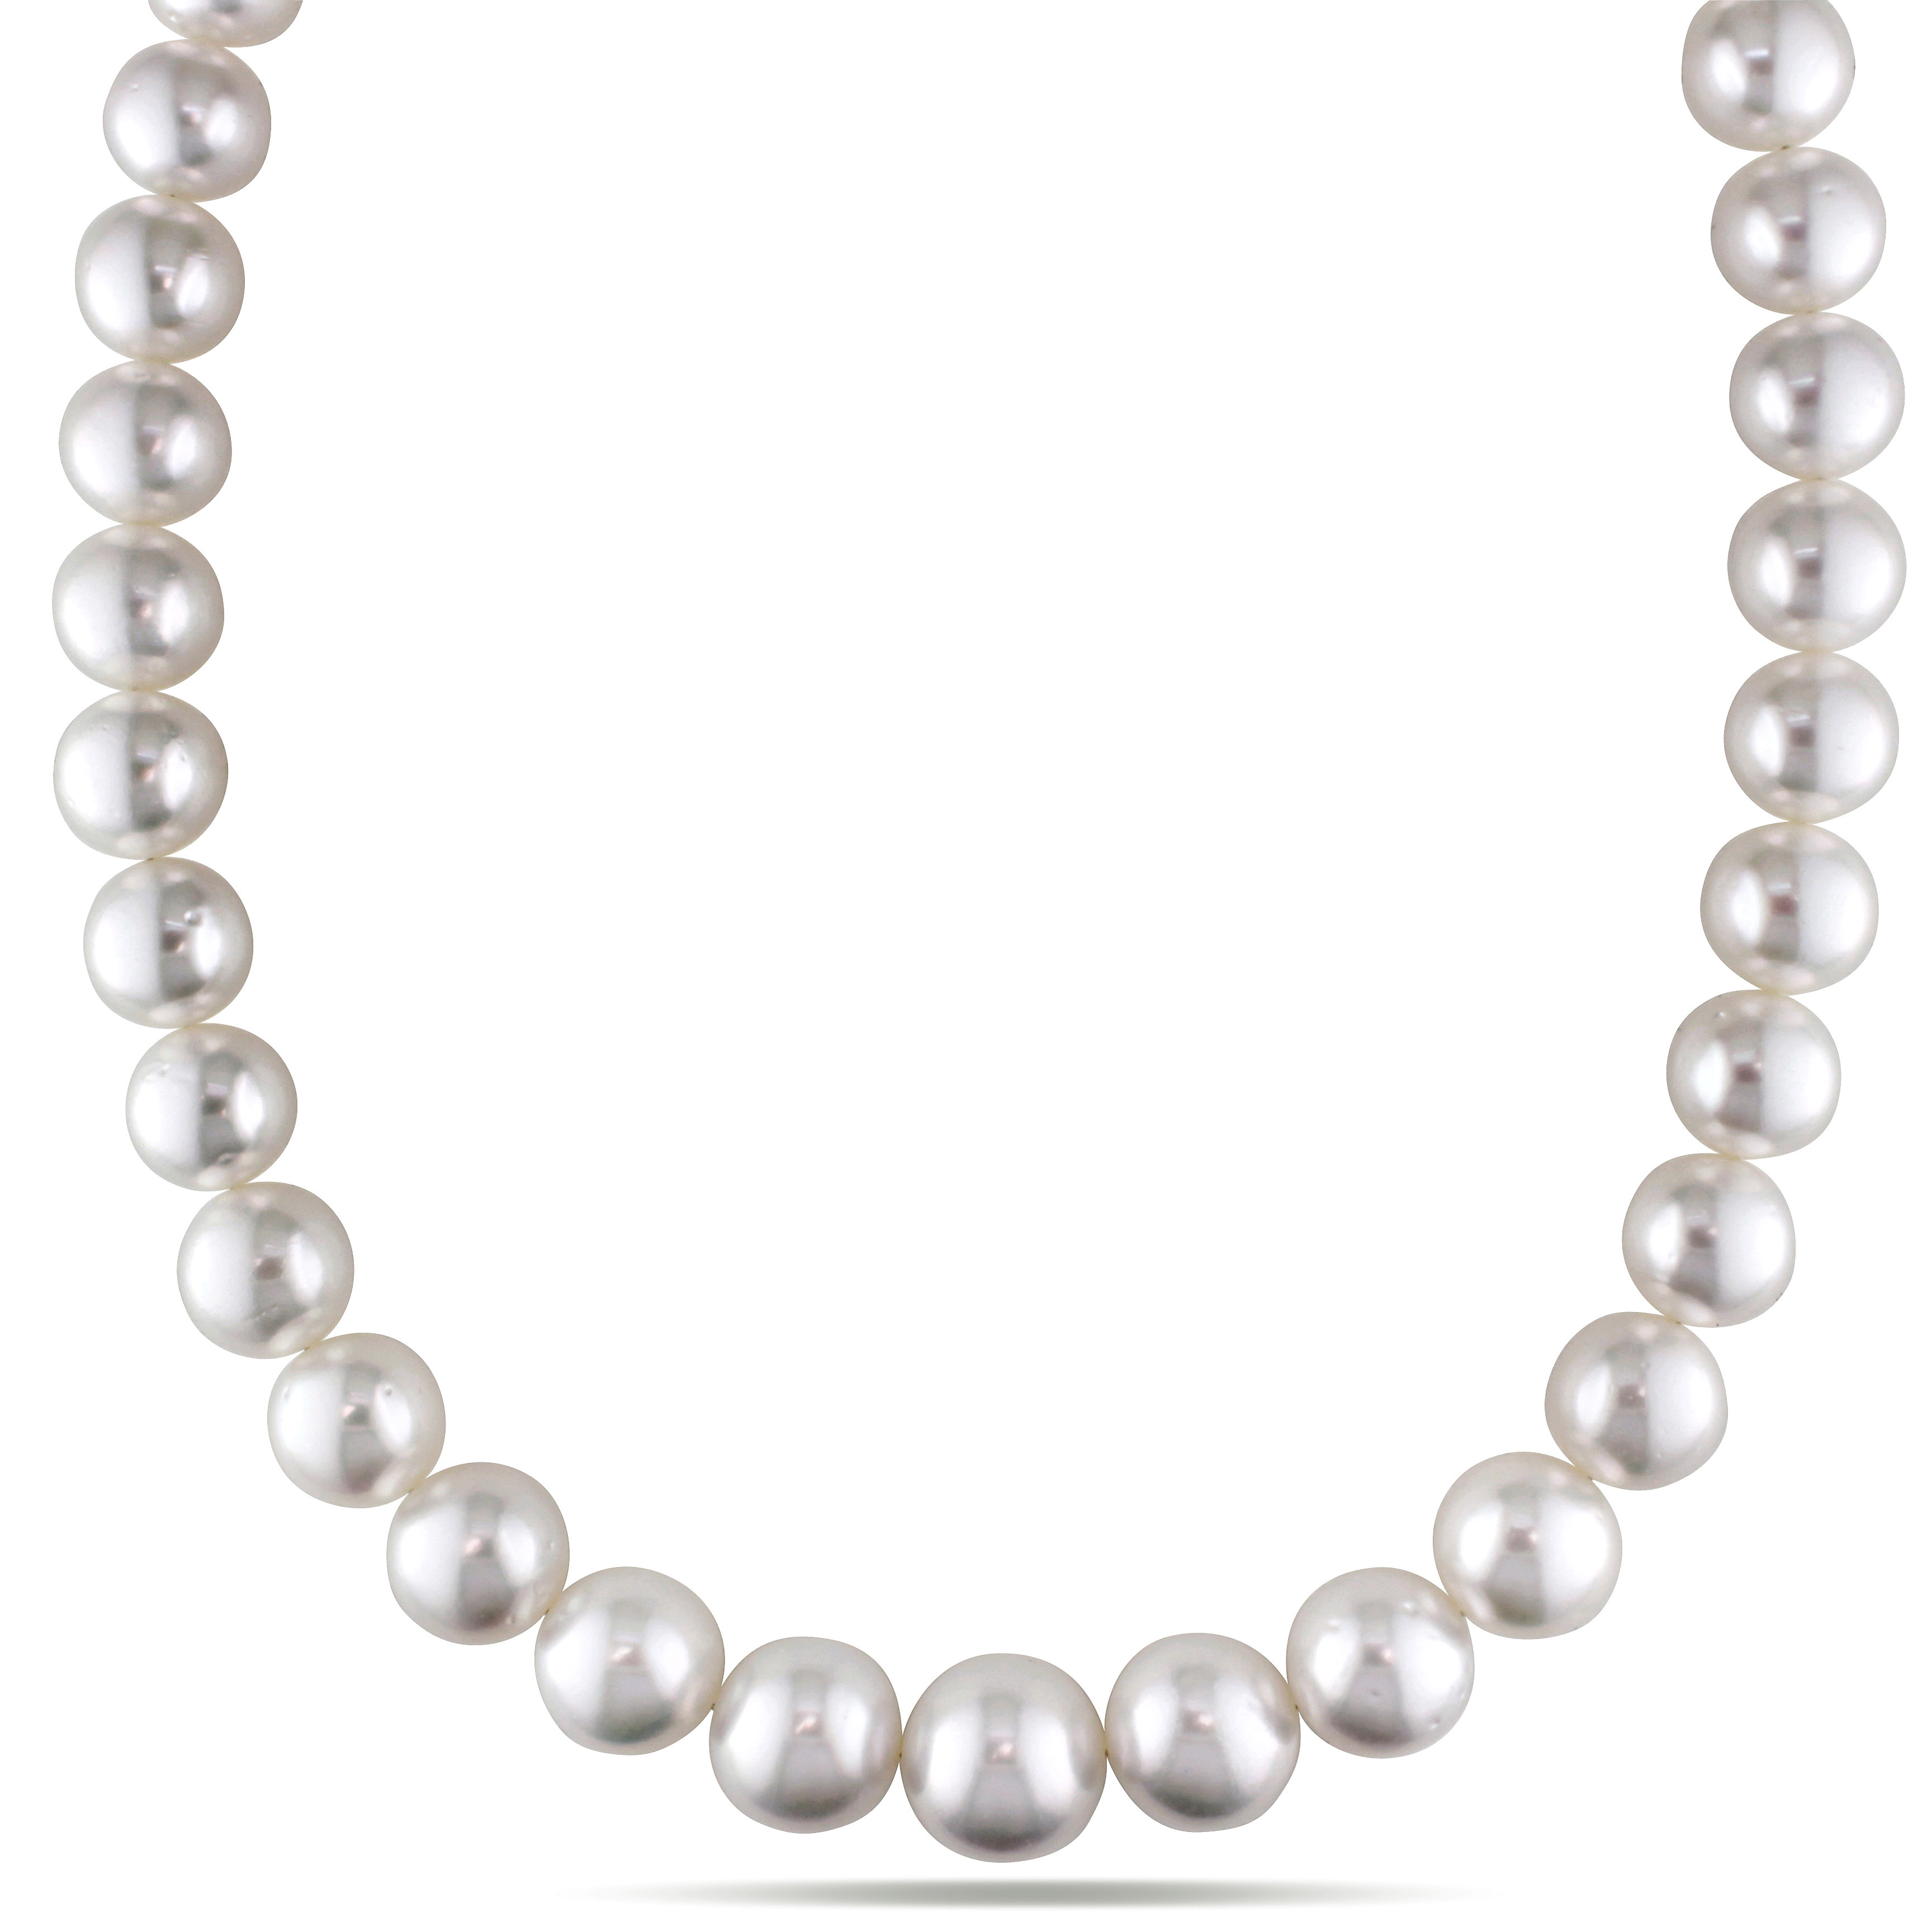 13-16 MM White South Sea Graduated Pearl Strand with 14k Yellow Gold Diamond Accent Ball Clasp - 18 in